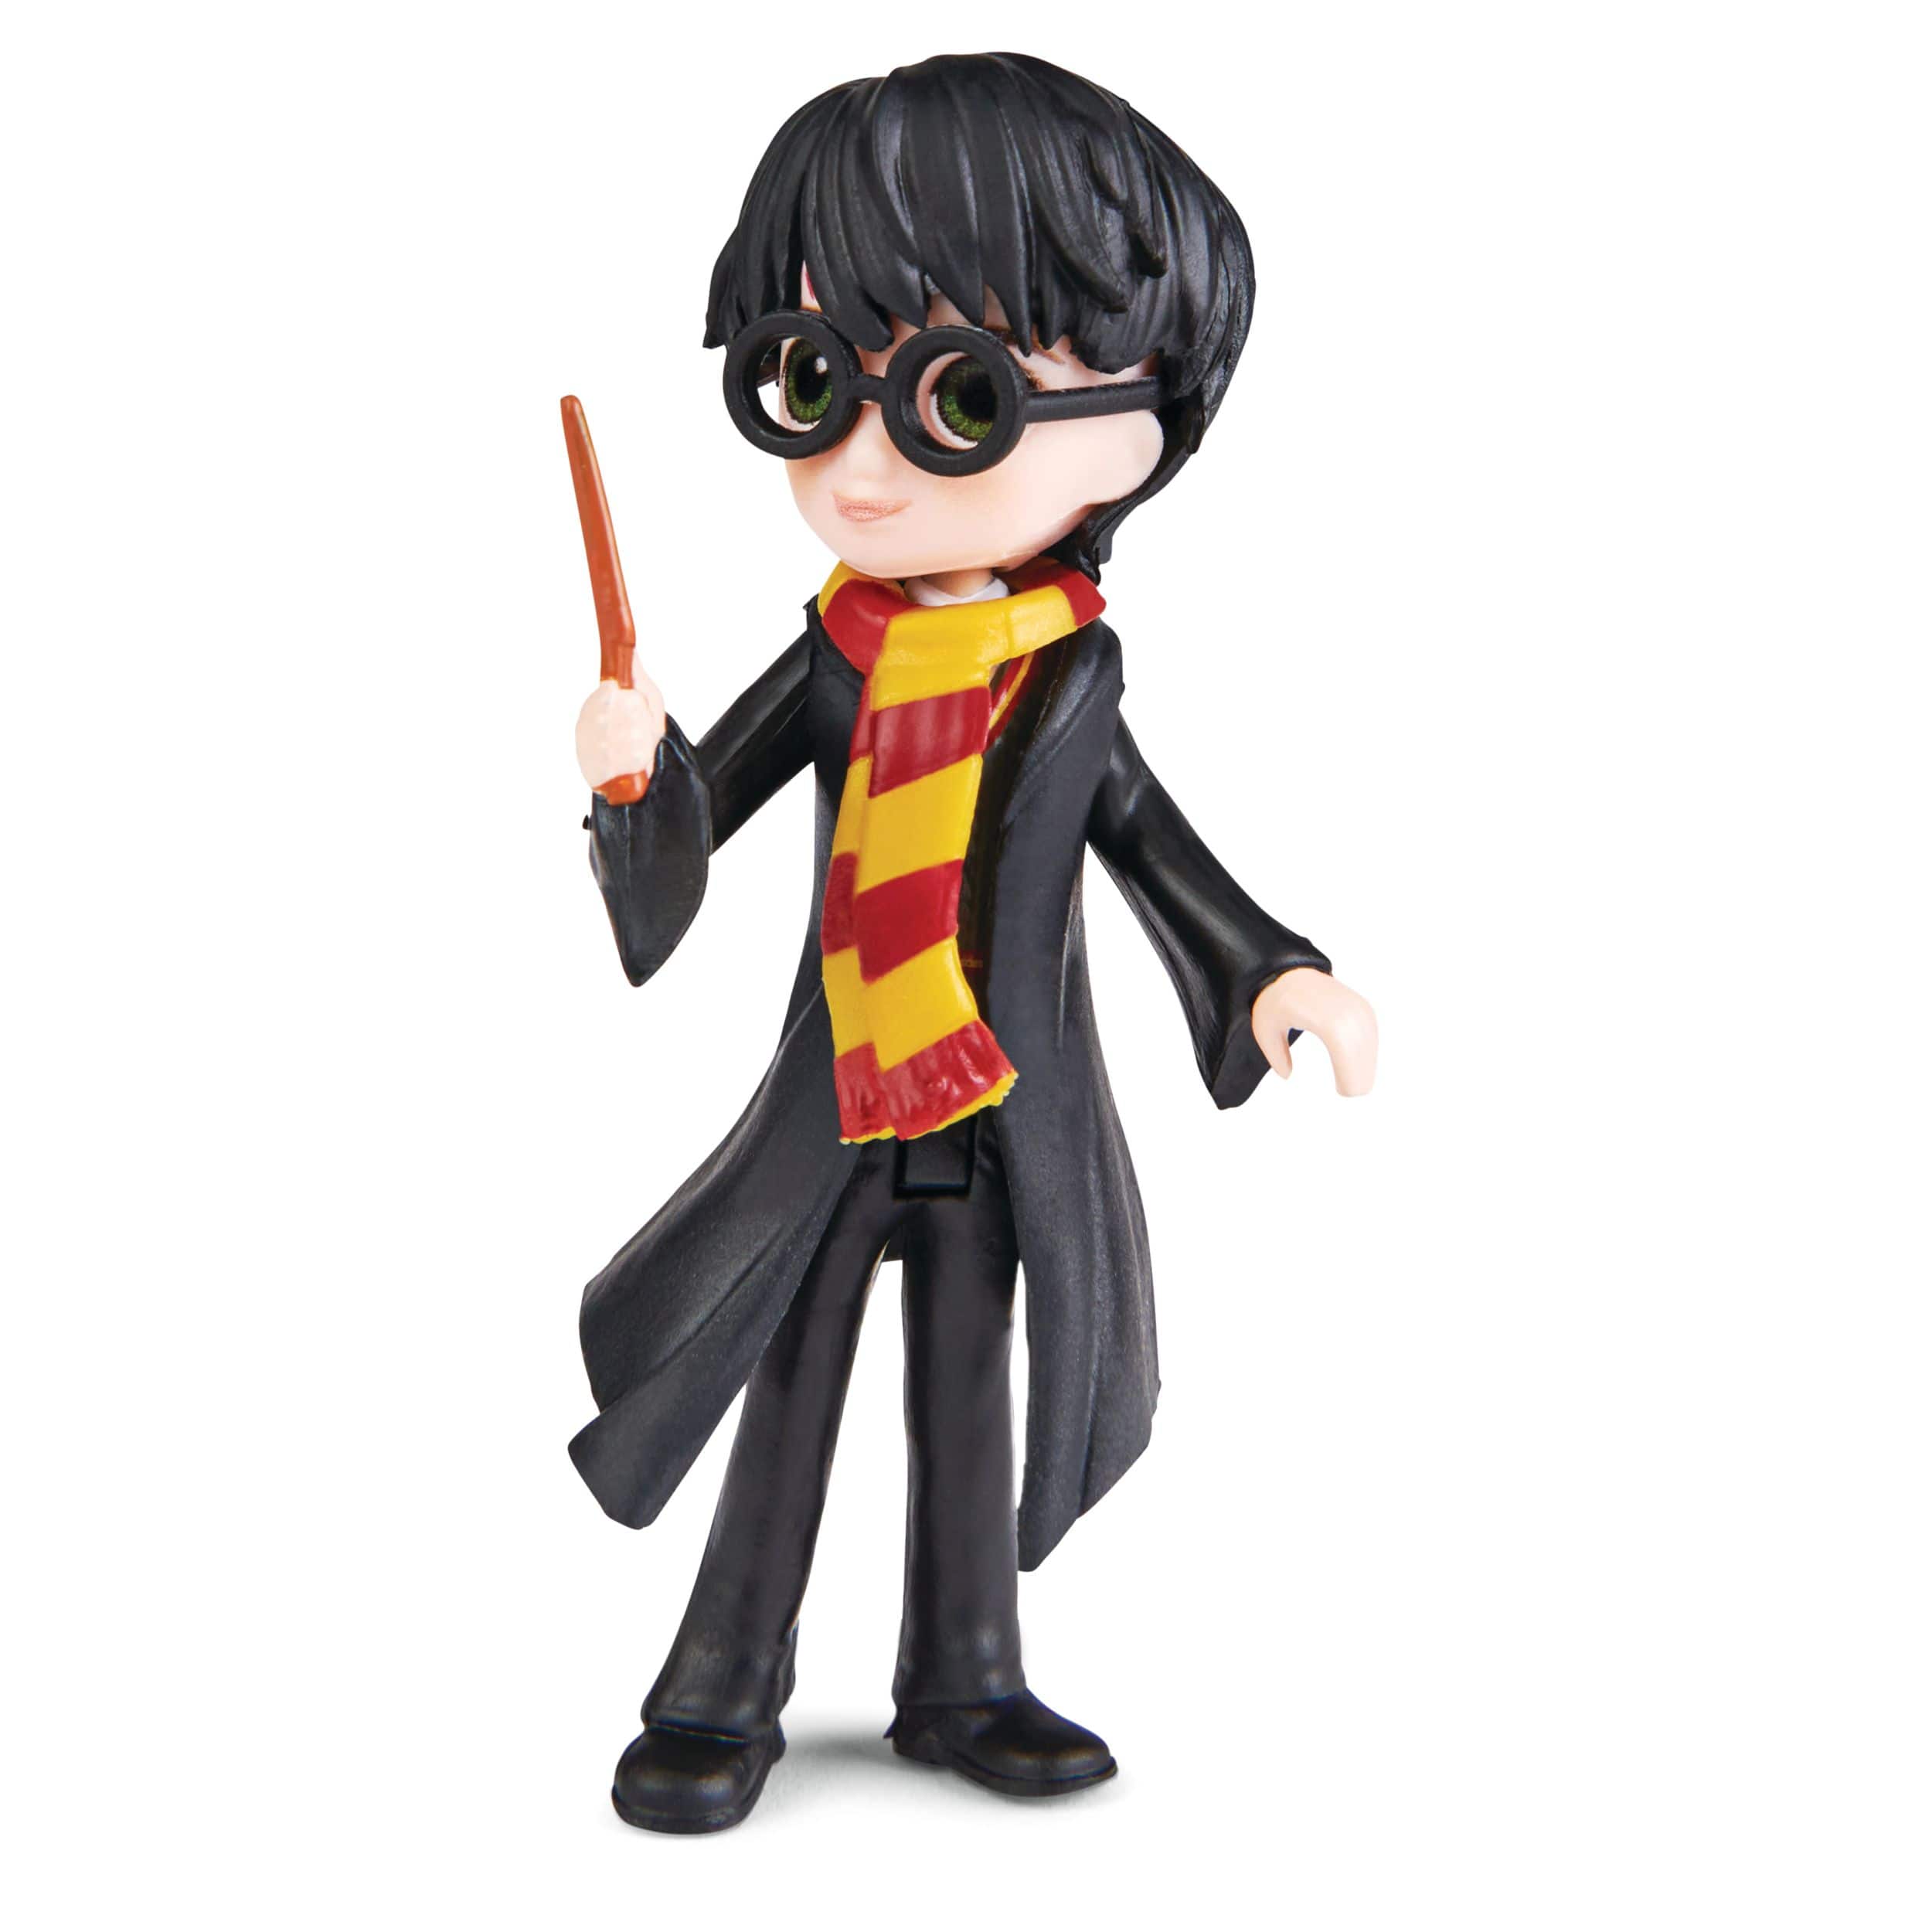 Wizarding World, Magical Minis Collectible Harry Potter Figure